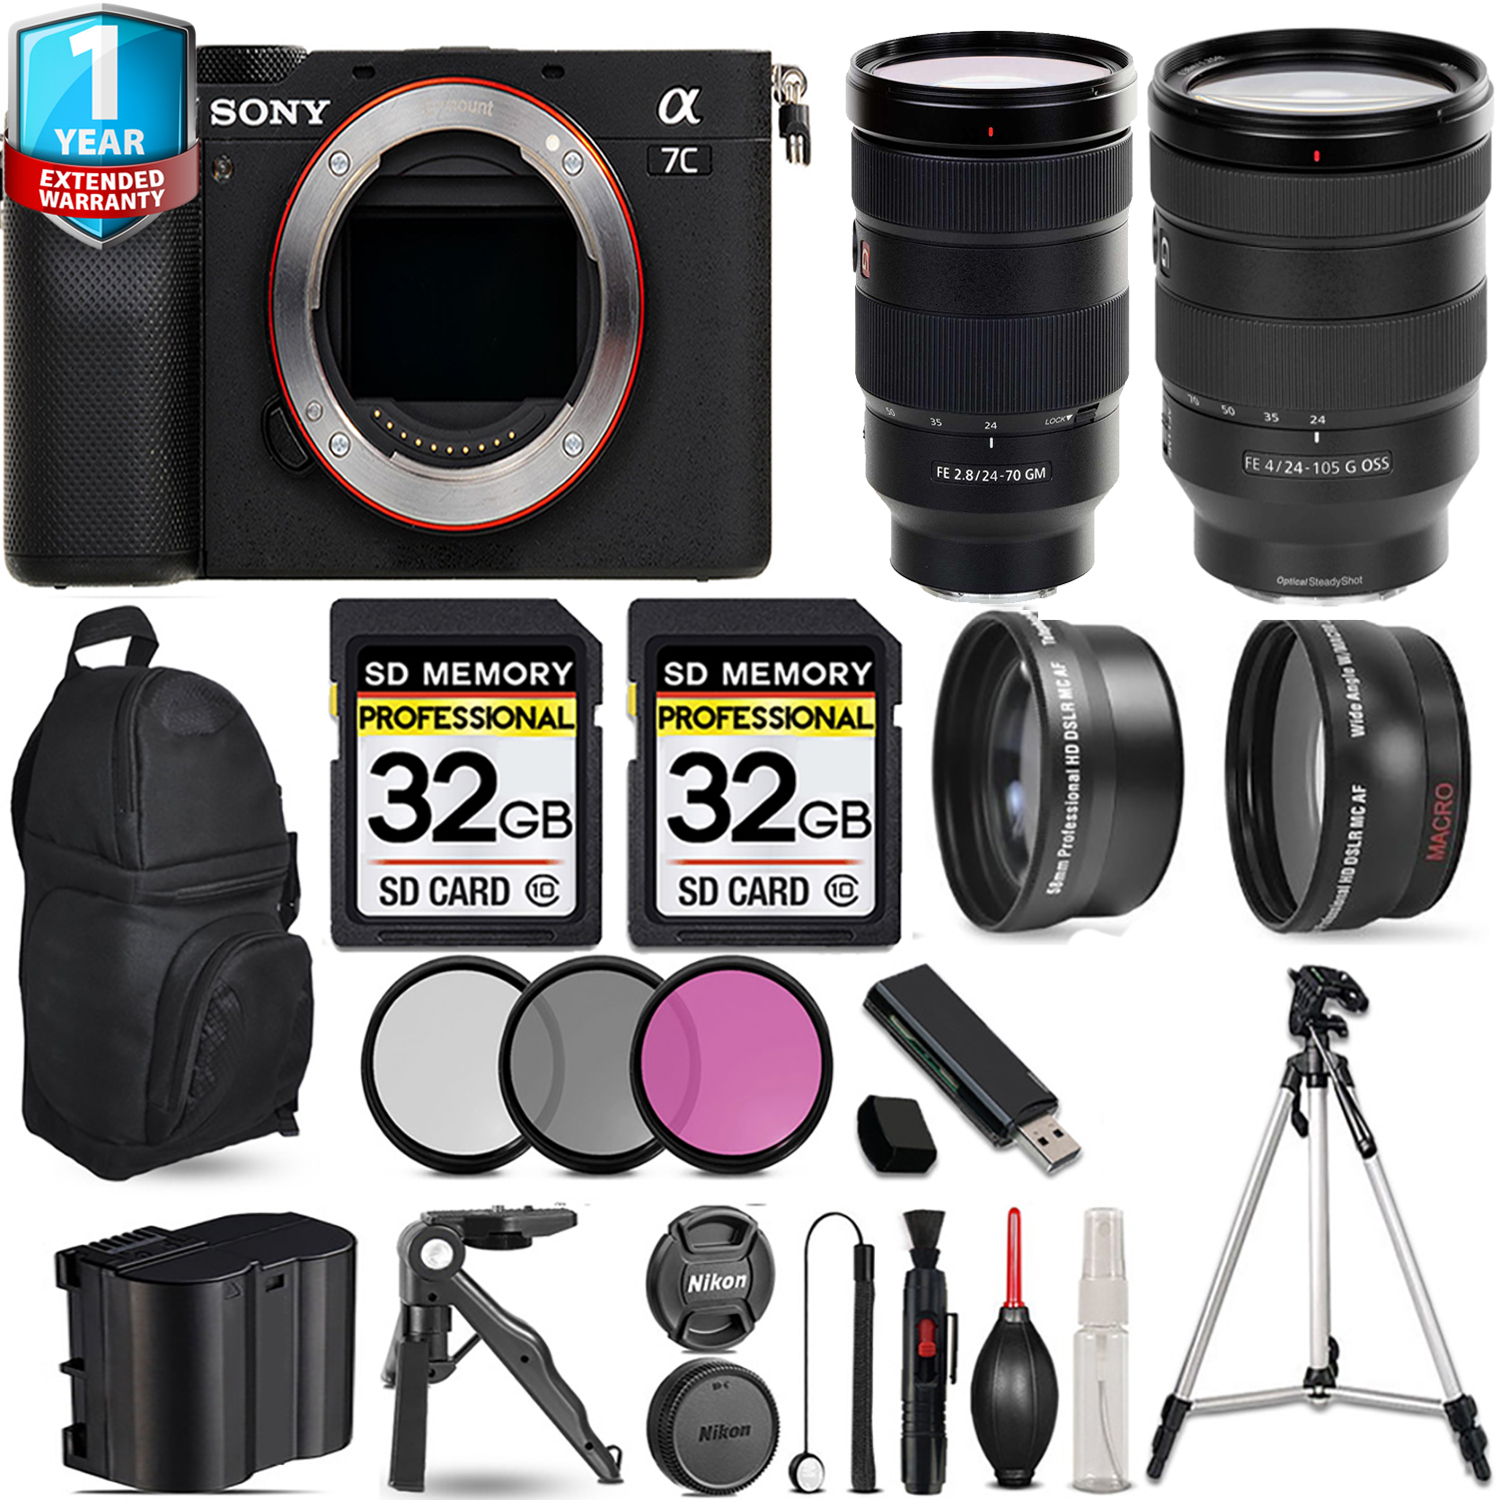 Alpha a7C Camera (Silver) + 70- 300mm Lens + 24-70mm Lens + Bag + 1 Year Extended Warranty + 64GB *FREE SHIPPING*